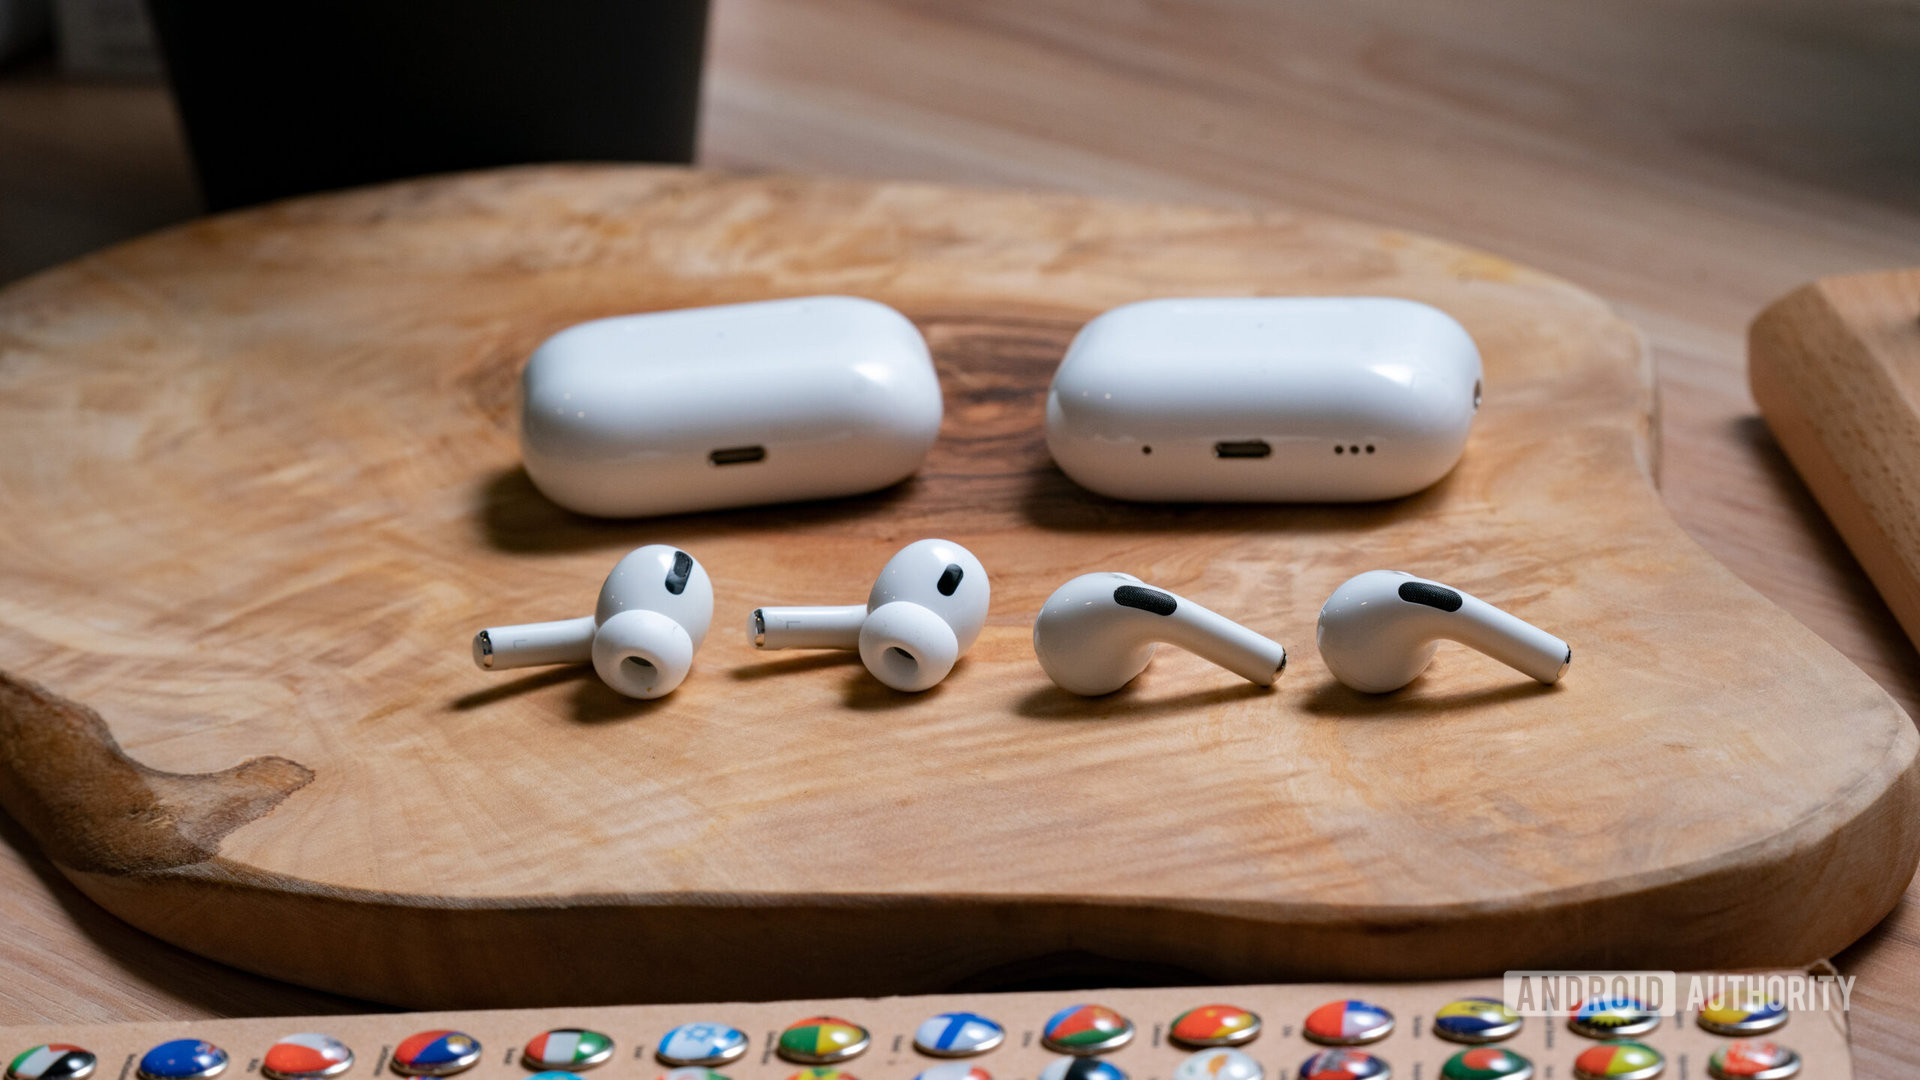 Apple Is Reportedly Working on a Significant New Feature for Its AirPods Pro